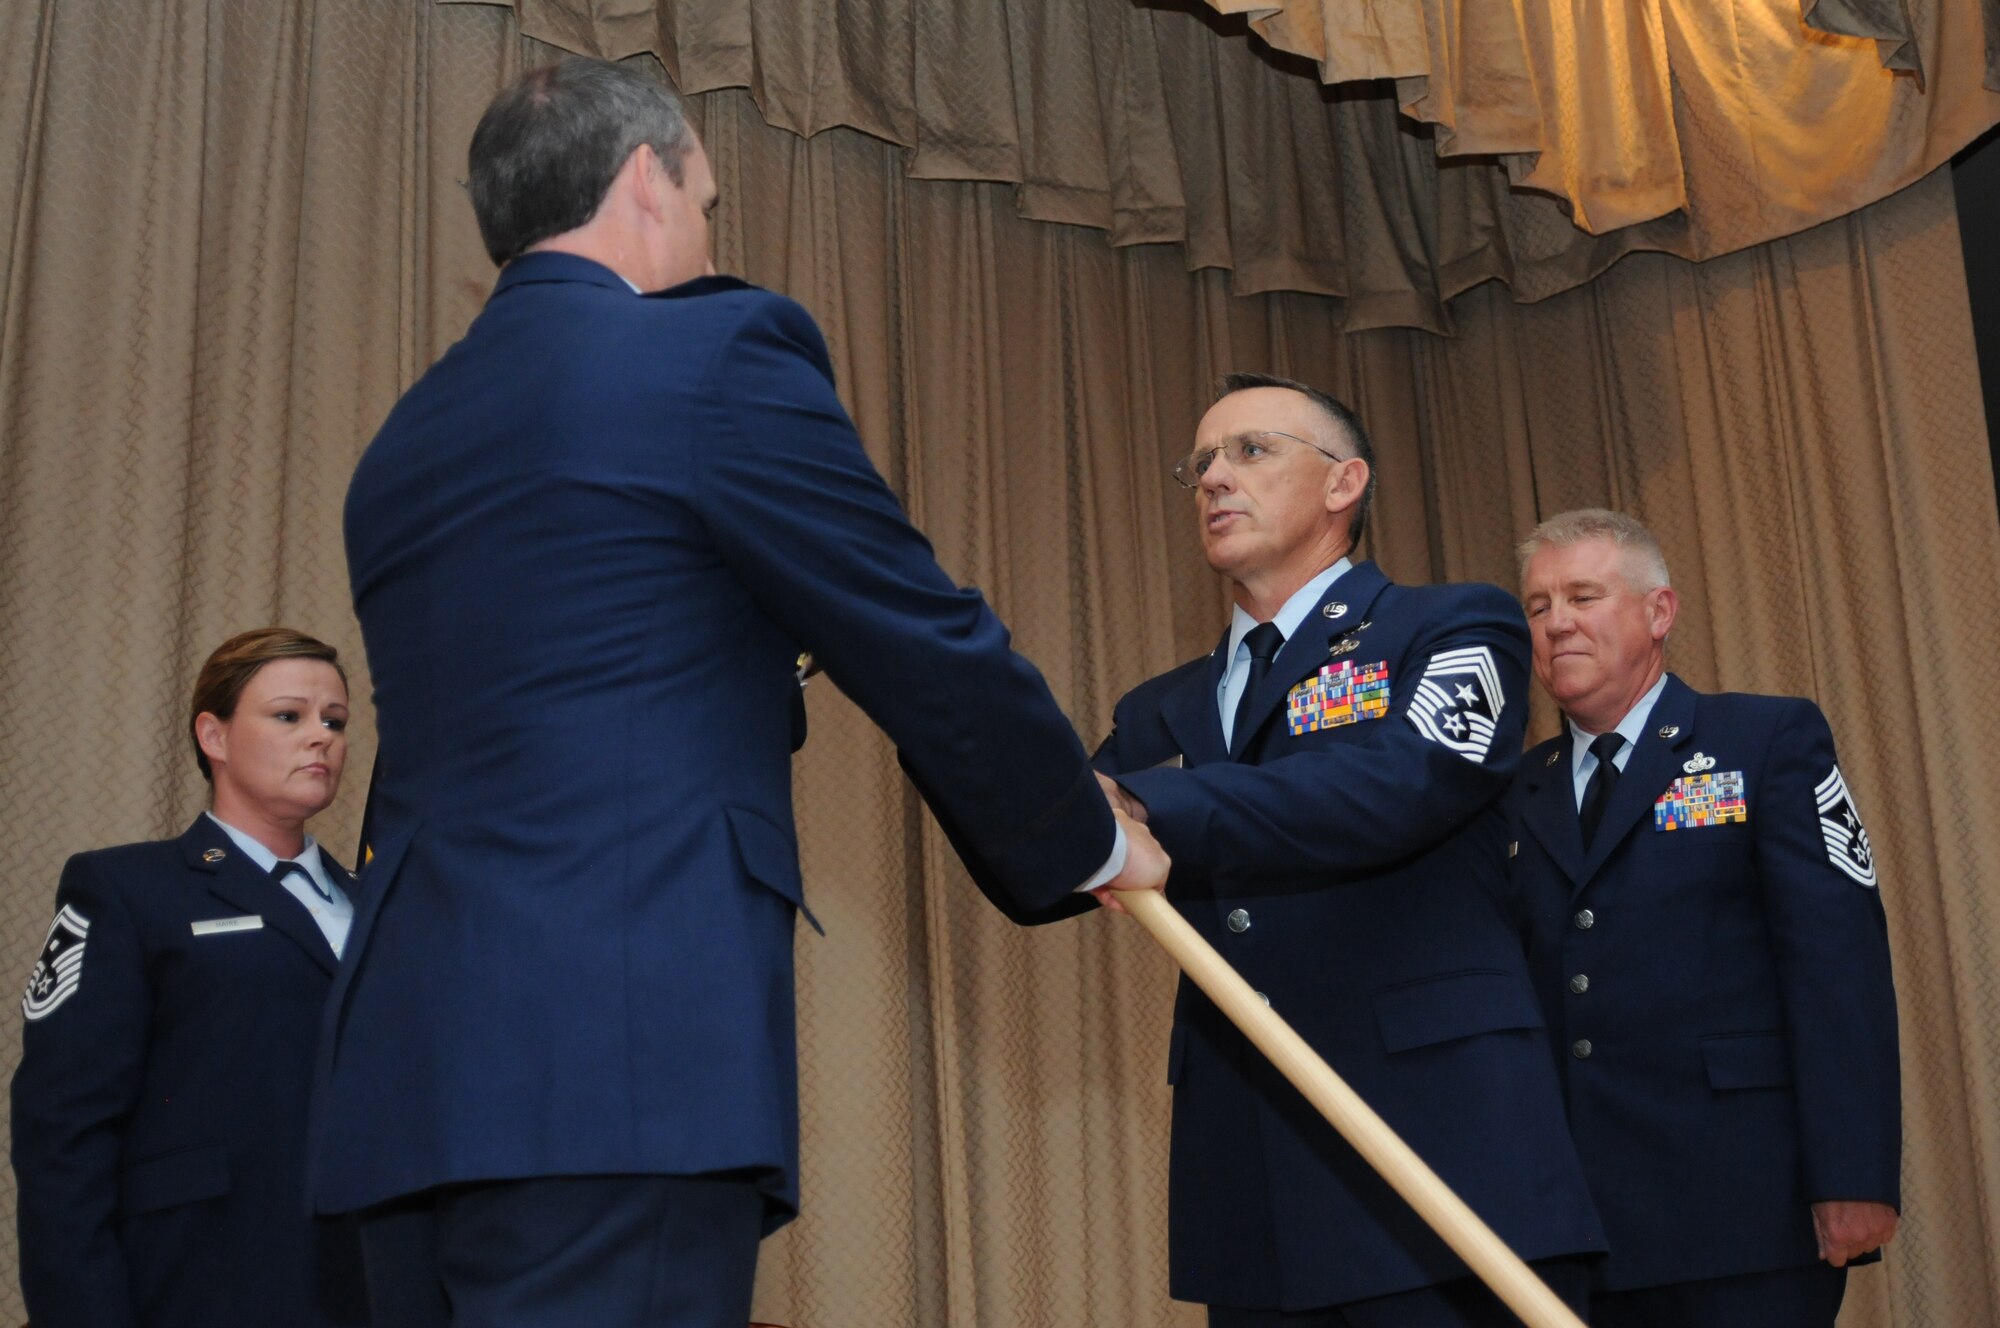 U.S. Air Force Col. Kirk Pierce, 173rd Fighter Wing Commander, passes the guideon to Chief Master Sgt. Mark McDaniel during a change of authority ceremony at Kingsley Field, Ore. Aug. 2, 2015.  McDaniel takes over as the top enlisted advisor for the 173rd FW from Chief Master Sgt. Danny Ross who served as the command chief since 2012.  (U.S. Air Force photo by Tech. Sgt. Jefferson Thompson/Released)